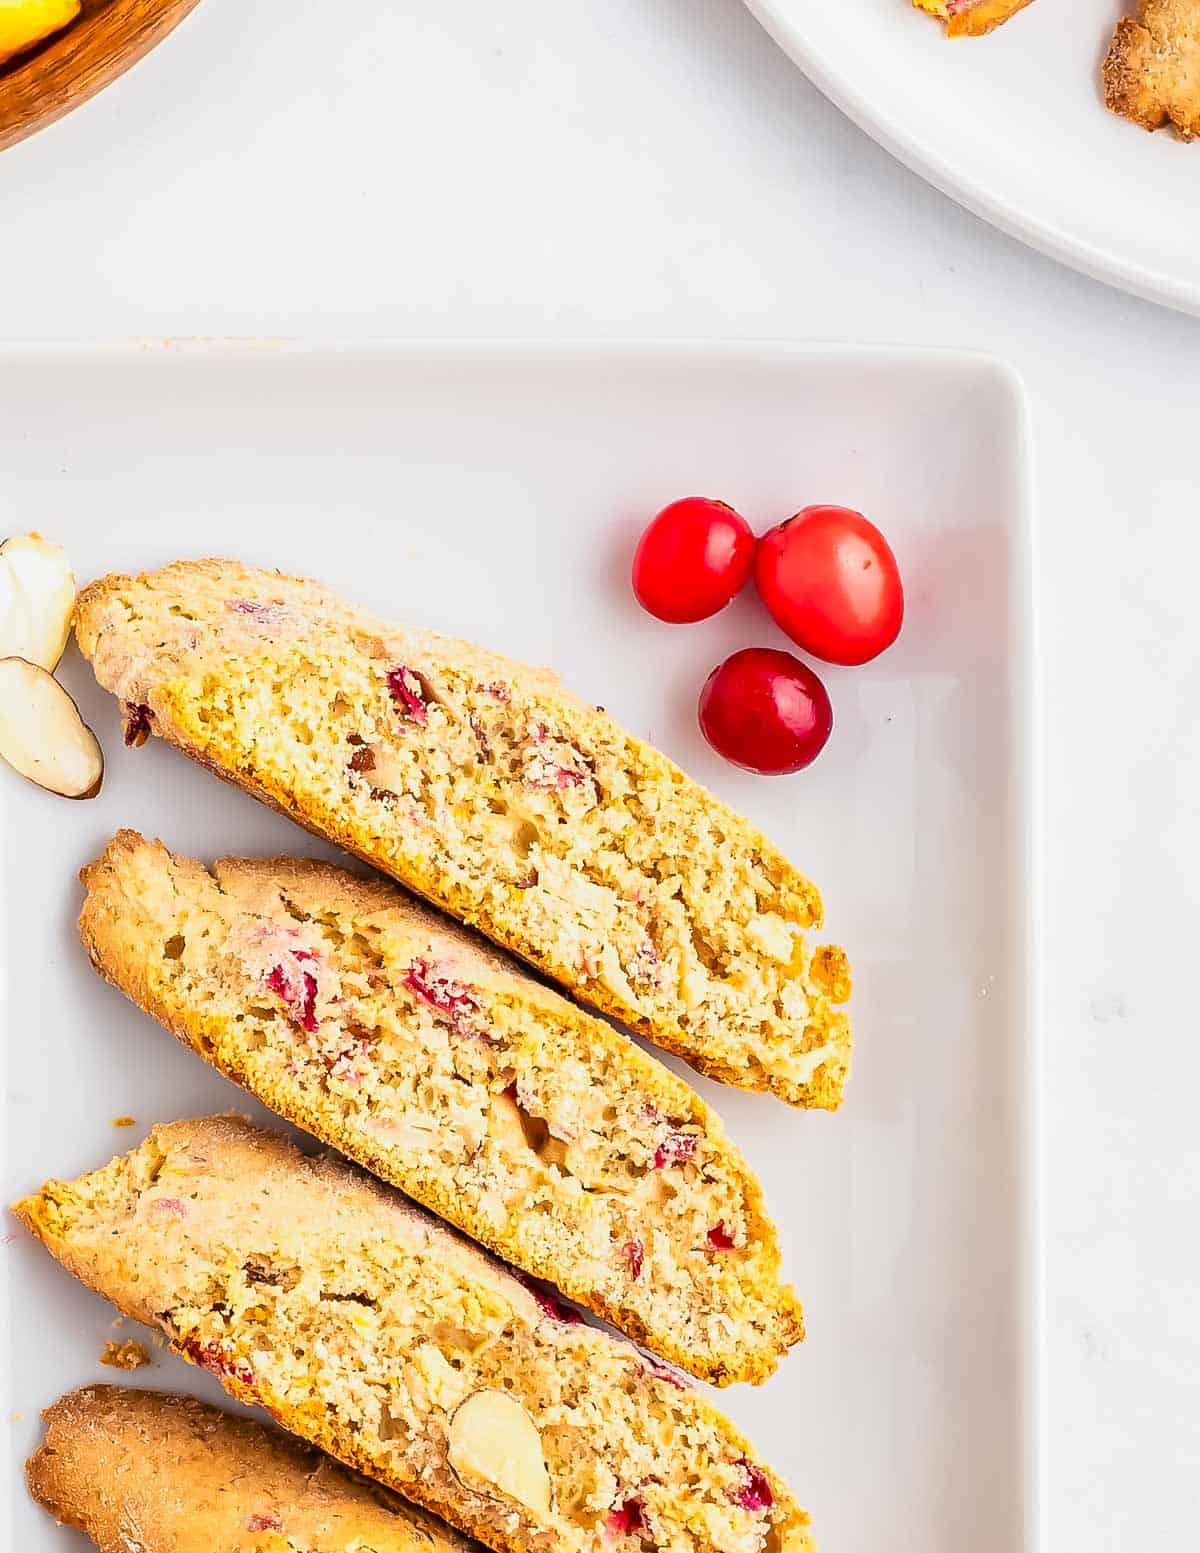 Biscotti with cranberries, oranges and almonds on a white plate.